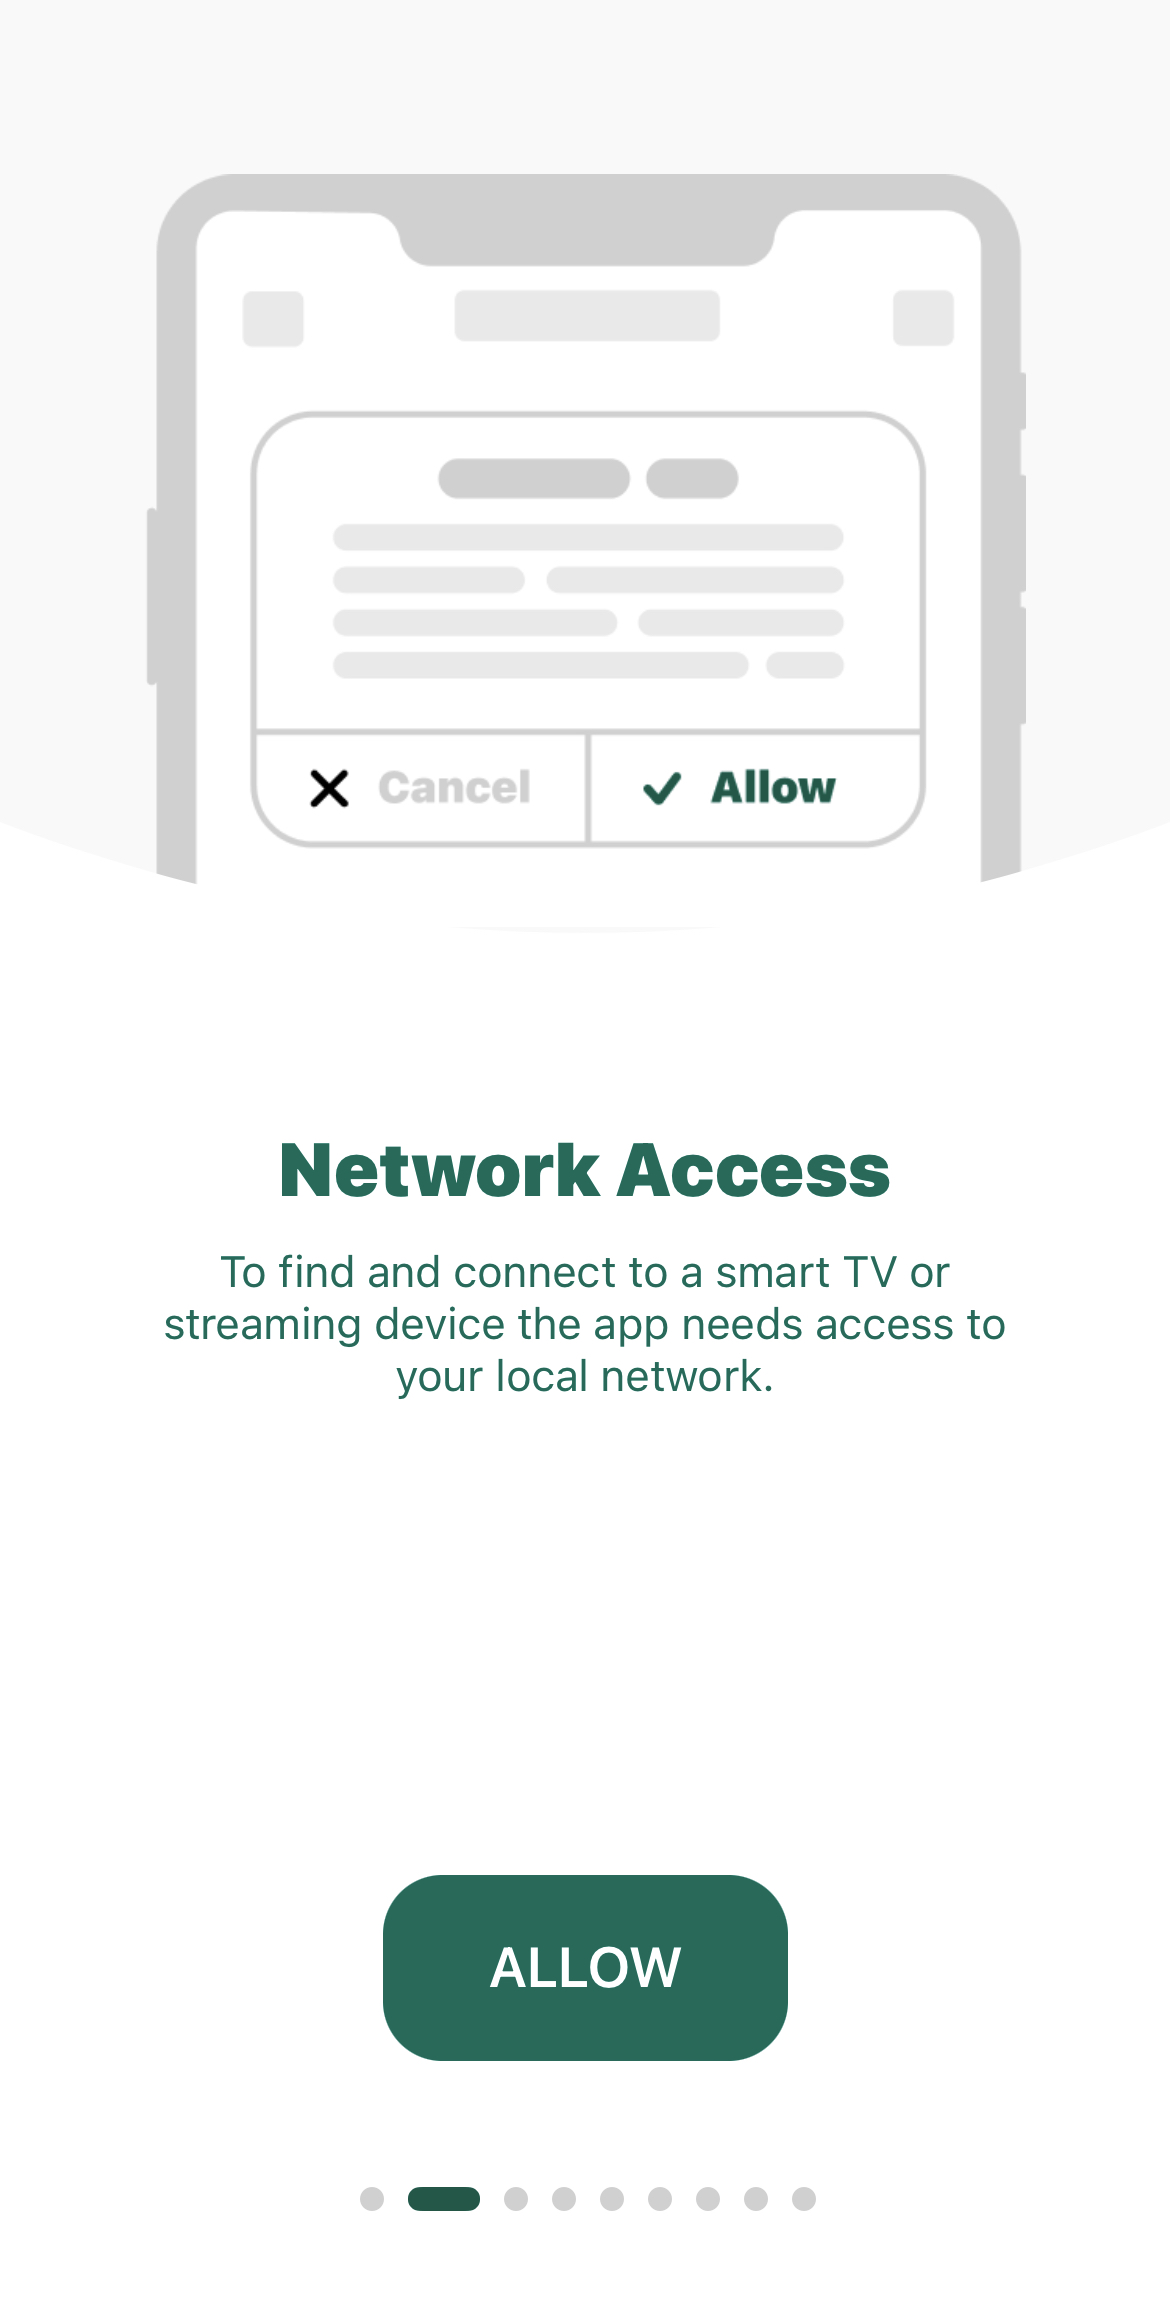 Giving a third-party app local network access